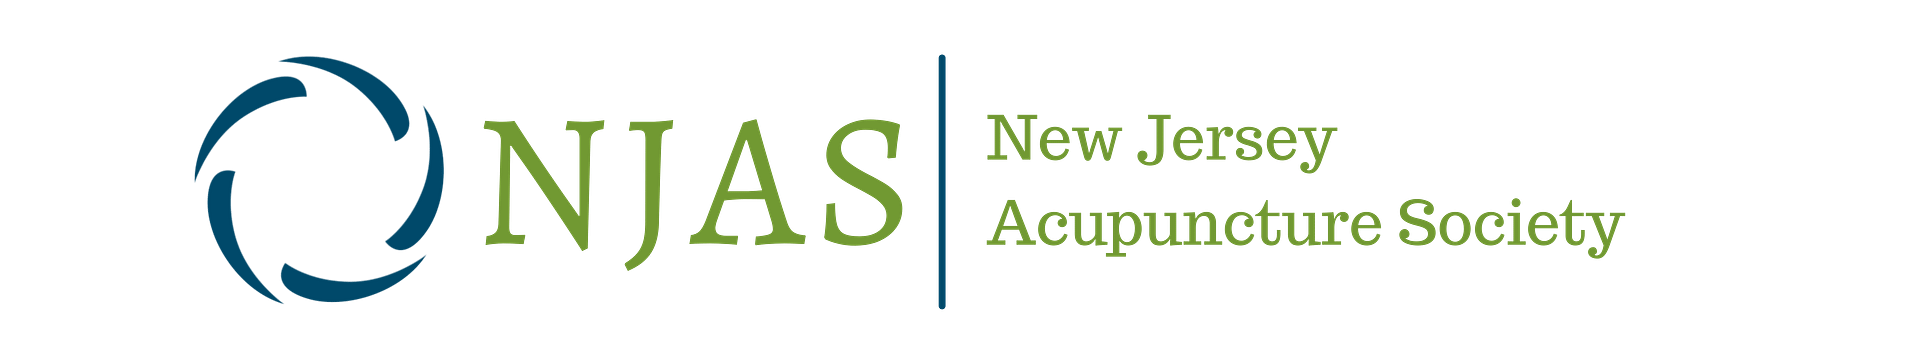 New Jersey Acupuncture Society